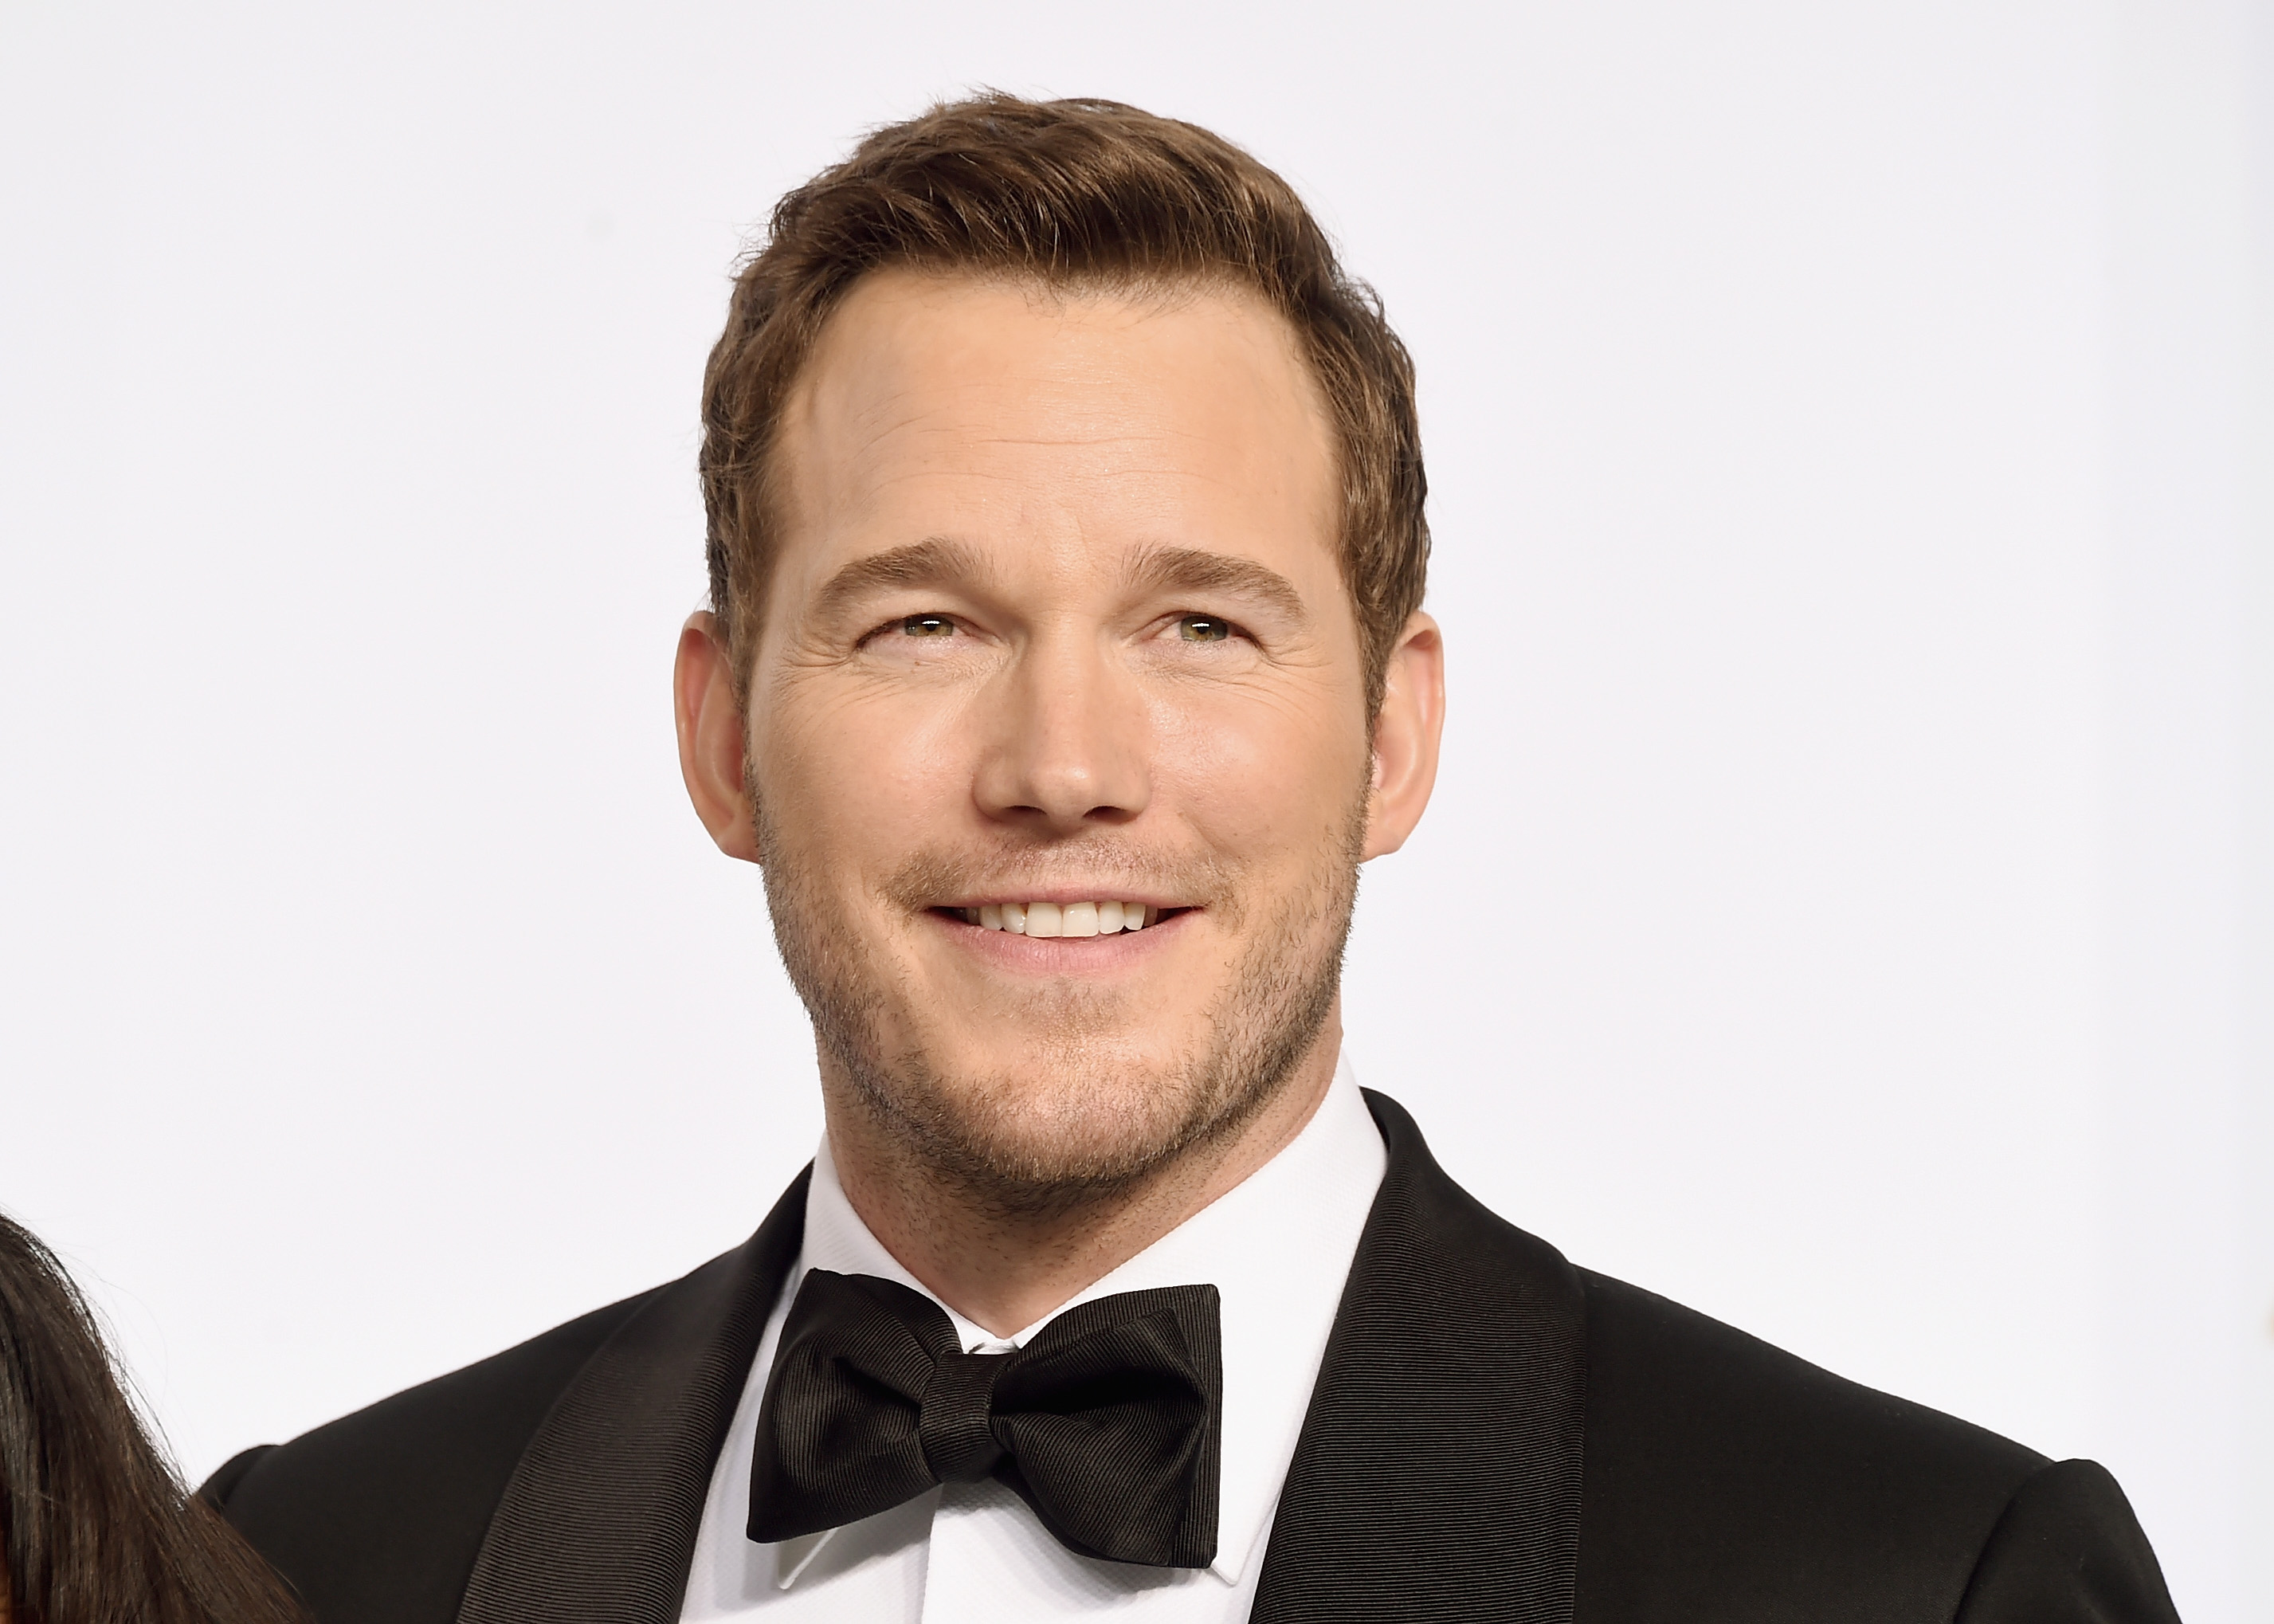 Chris Pratt during the 87th Annual Academy Awards on February 22, 2015 in Hollywood, California | Source: Getty Images